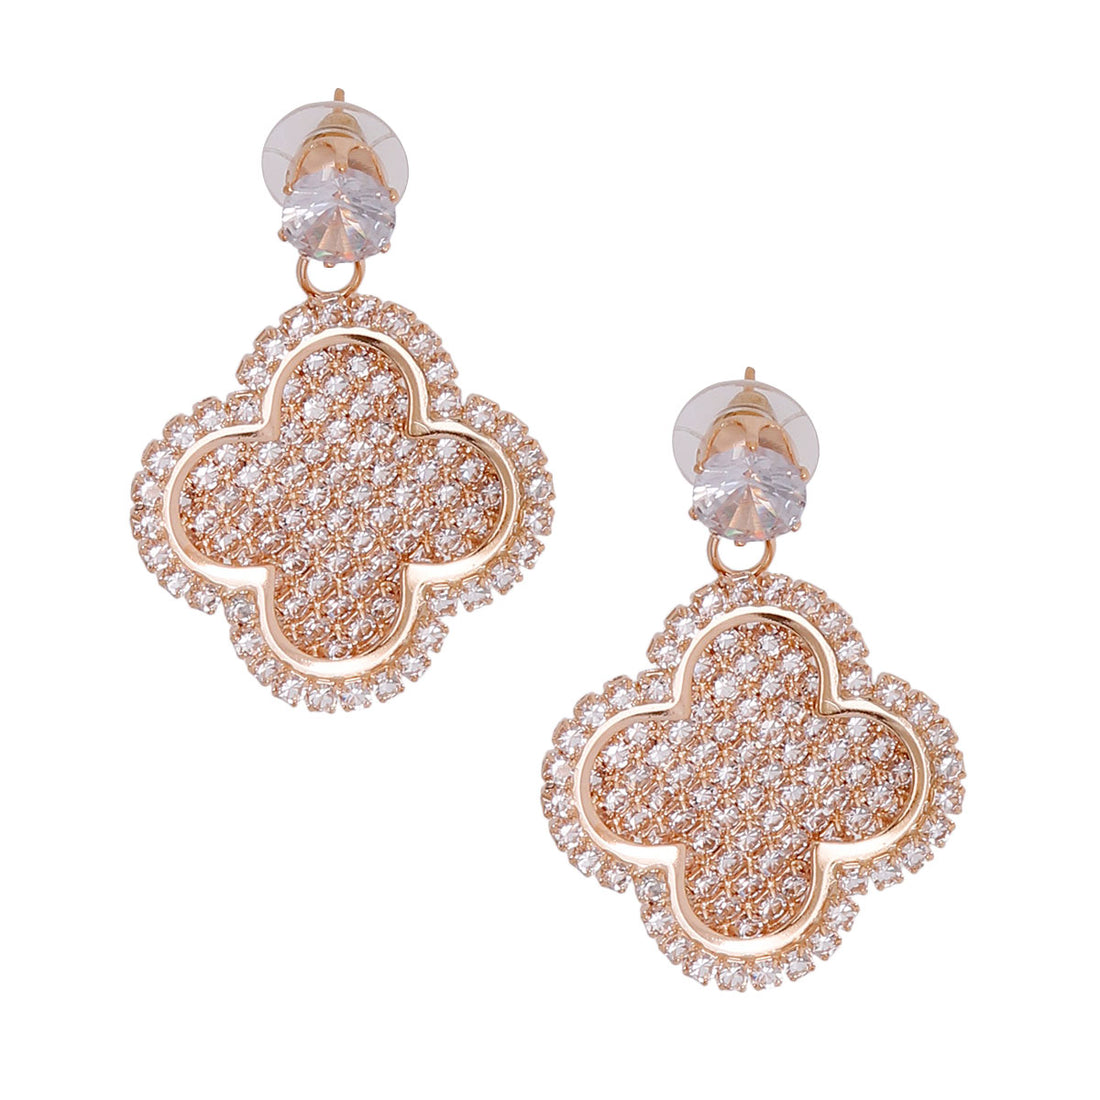 Gold Pave Clover Earrings